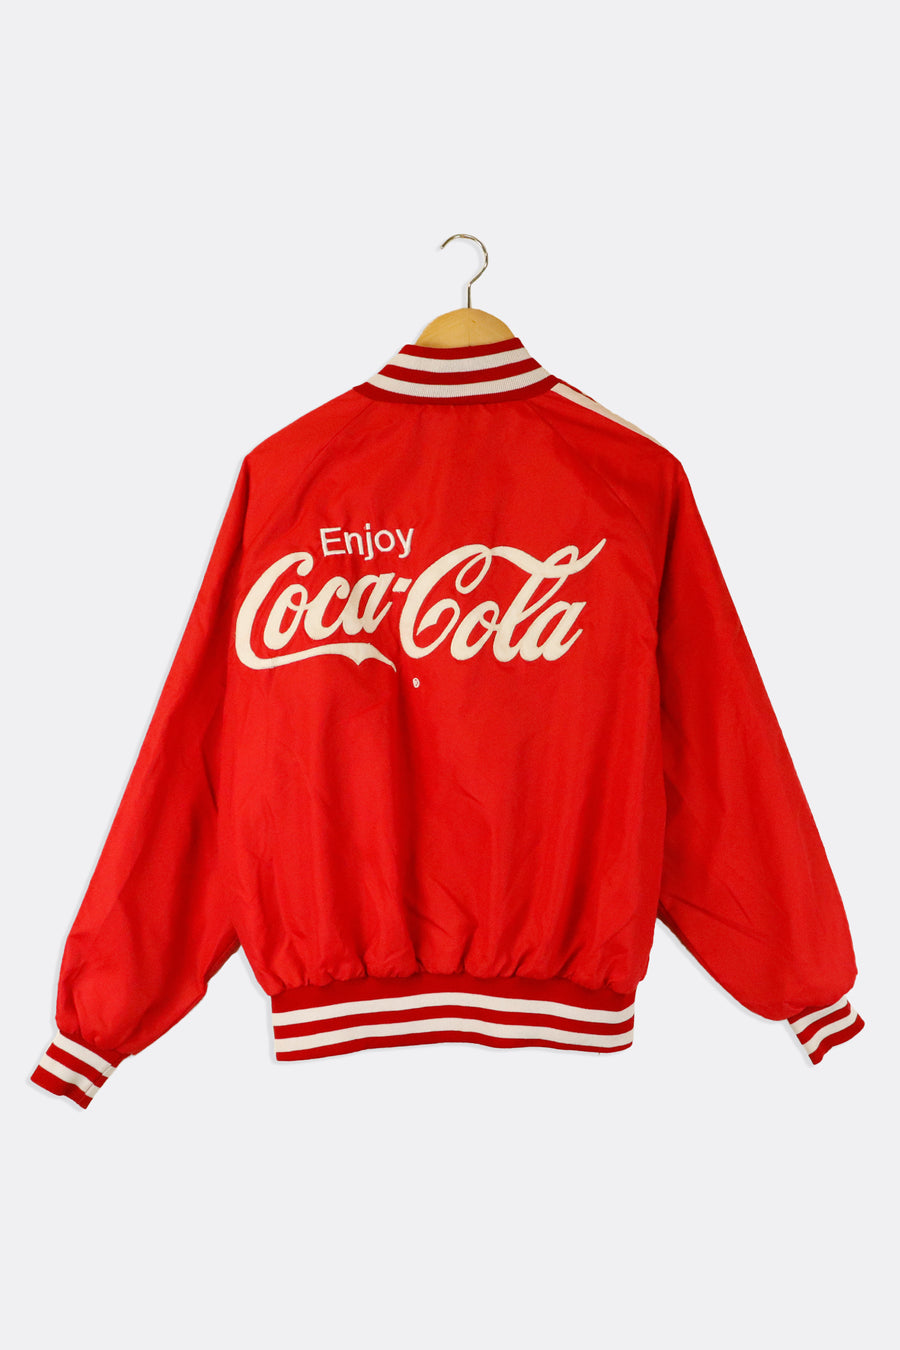 Vintage Enjoy Coca-Cola Embroidered Logo On Both Sides Stripped Collar And Cuffs Bomber Jacket Sz L